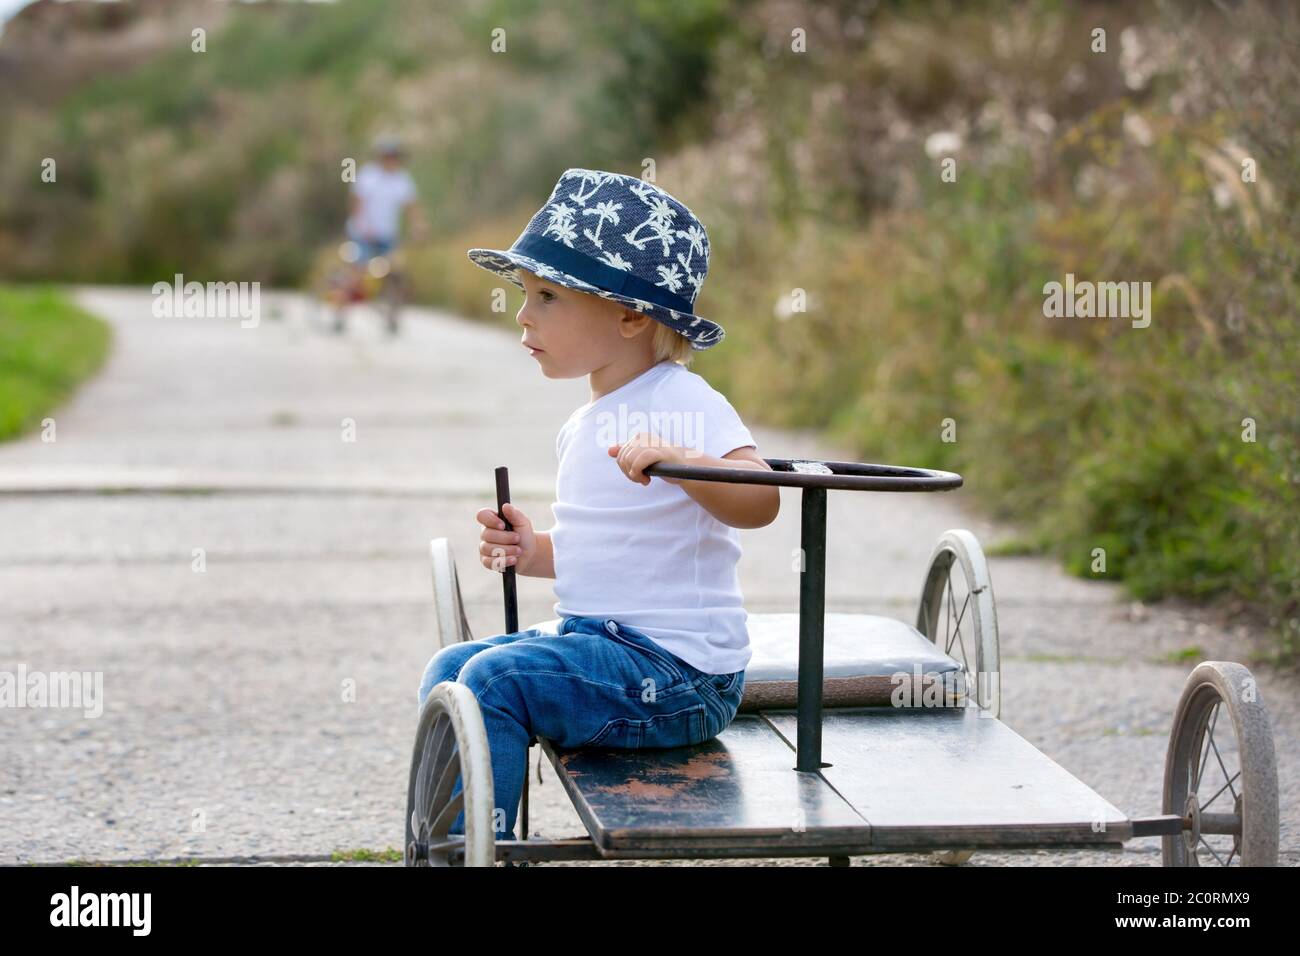 Adorable toddler boy, riding old retro car with four wheels in a village Stock Photo